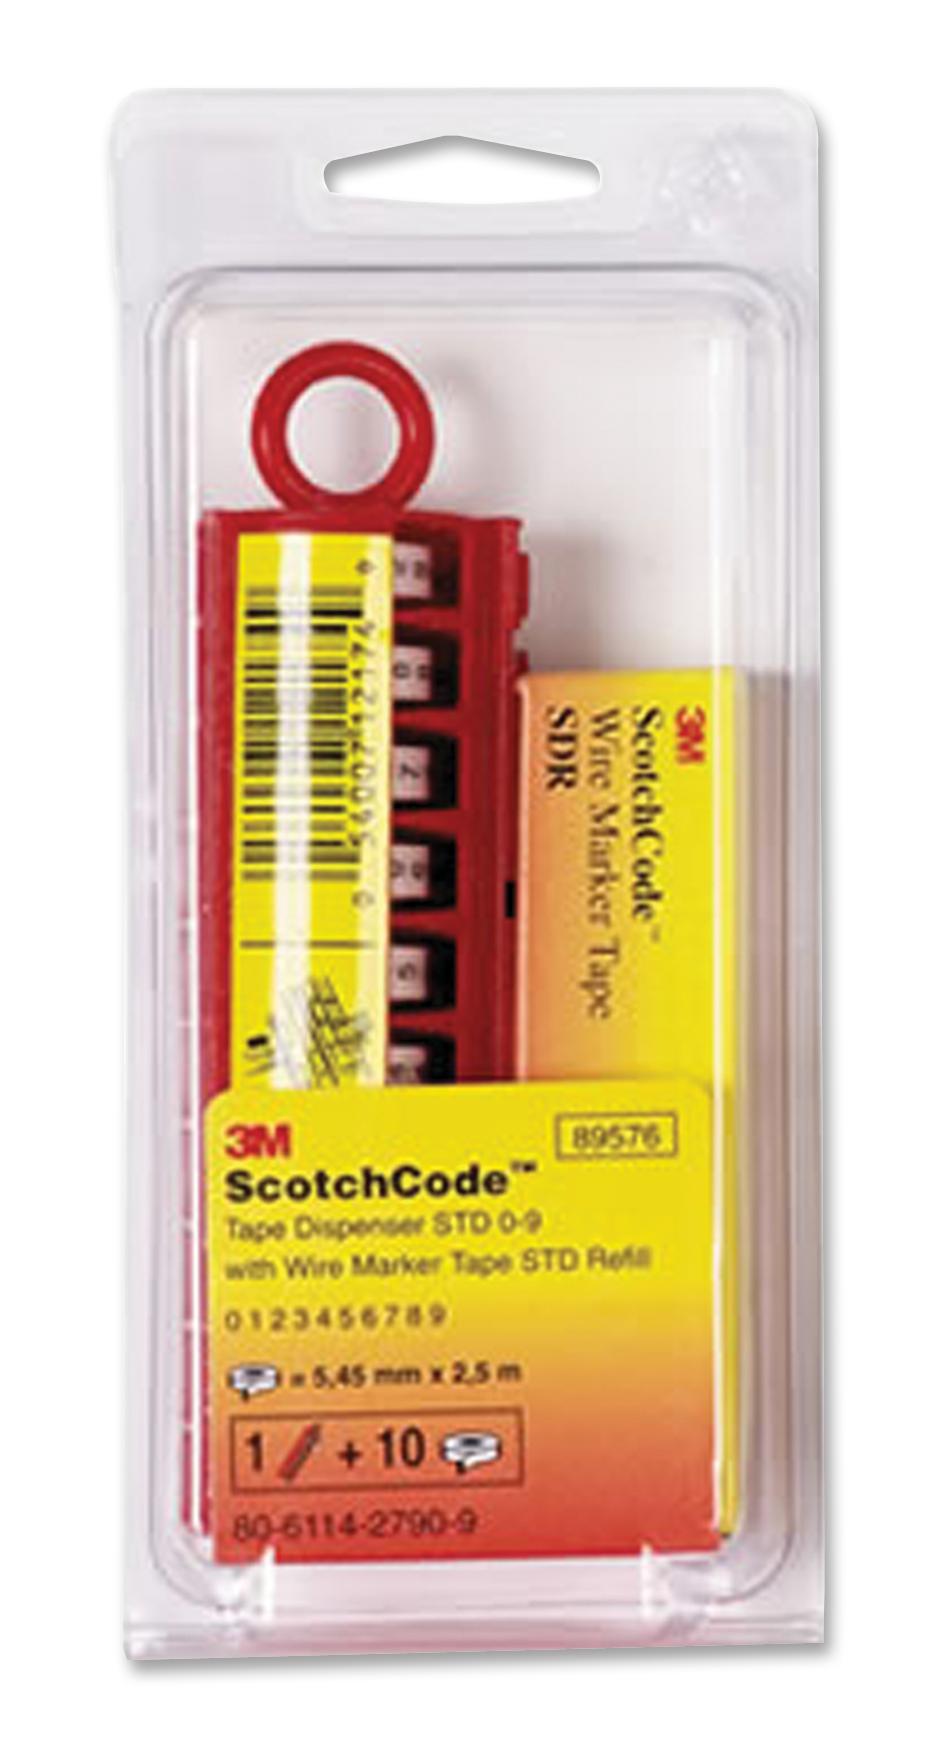 STD09 WIRE MARKER, REFILL, 0 TO 9, PK10 3M